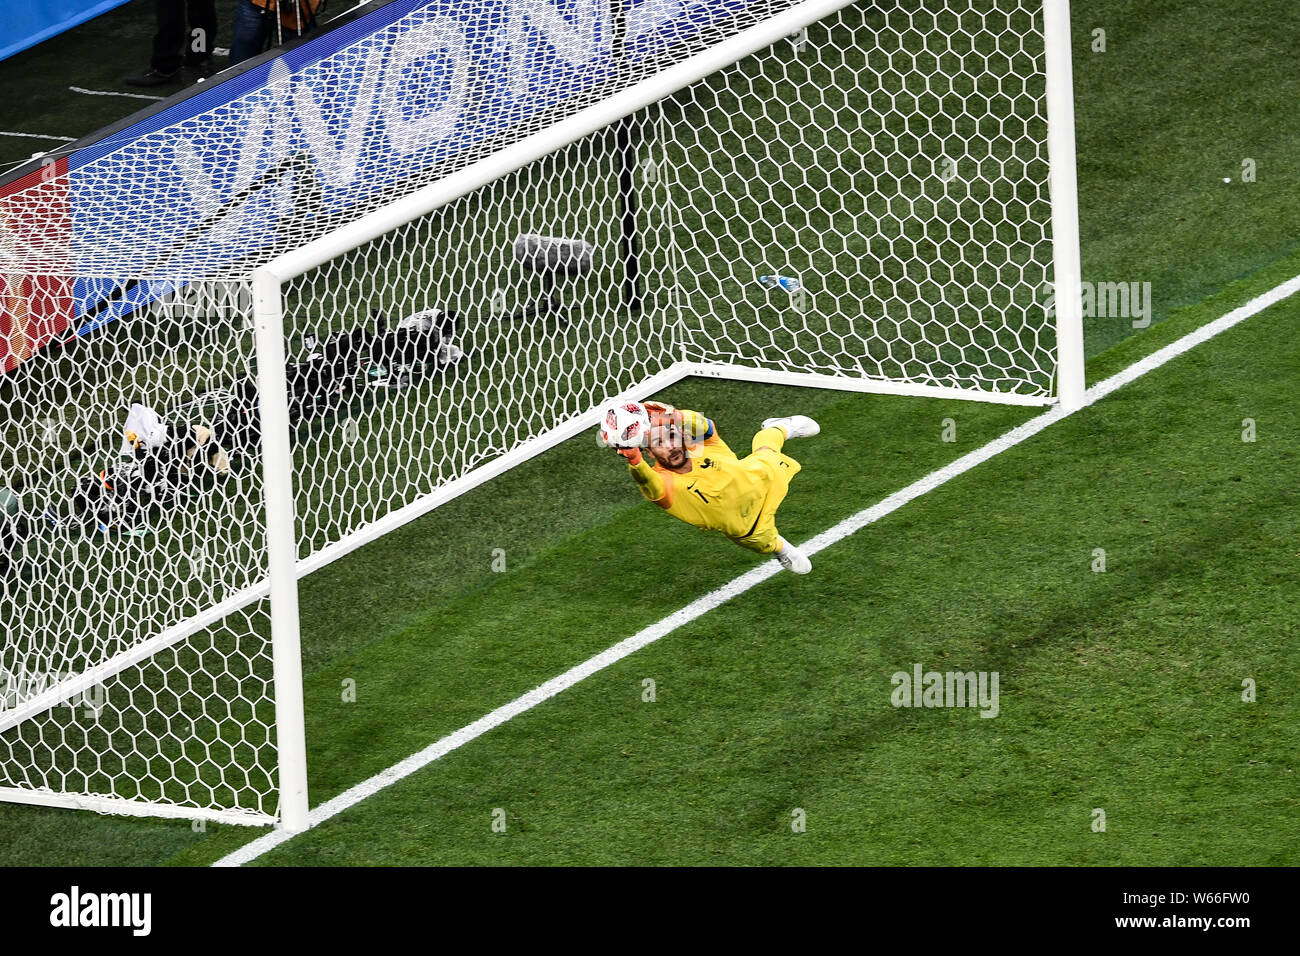 Goalkeeper Hugo Lloris of France saves a shot by Belgium in their semifinal match during the 2018 FIFA World Cup in Saint Petersburg, Russia, 10 July Stock Photo